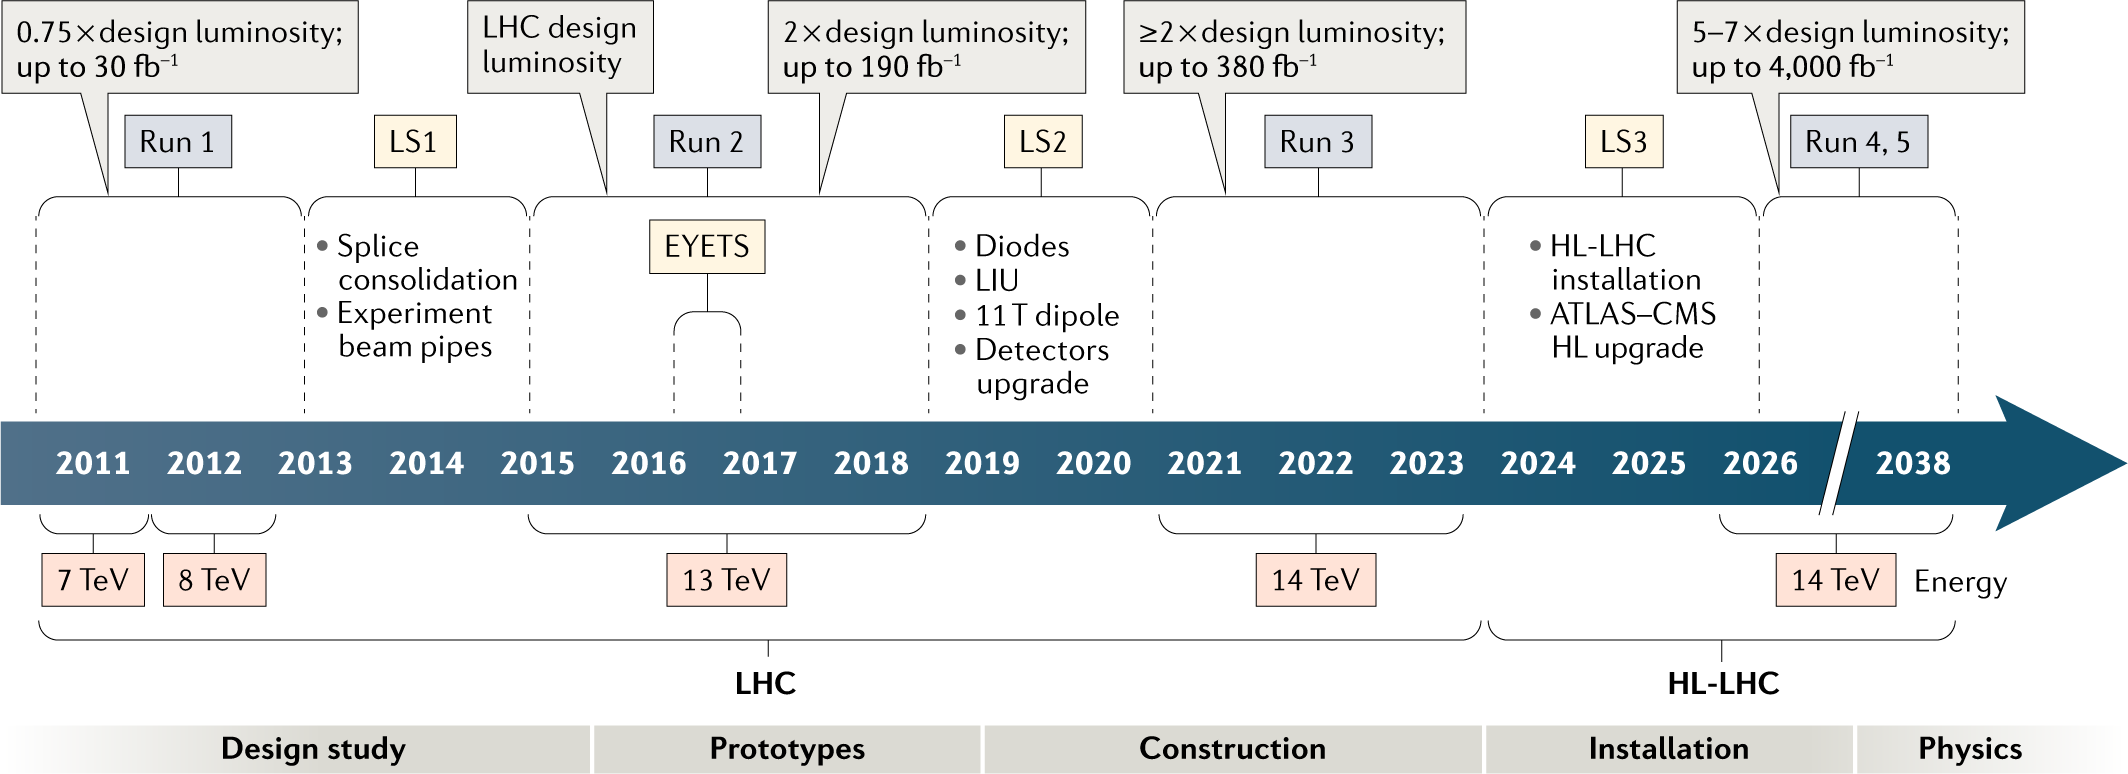 Lhc Schedule 2022 The High-Luminosity Large Hadron Collider | Nature Reviews Physics